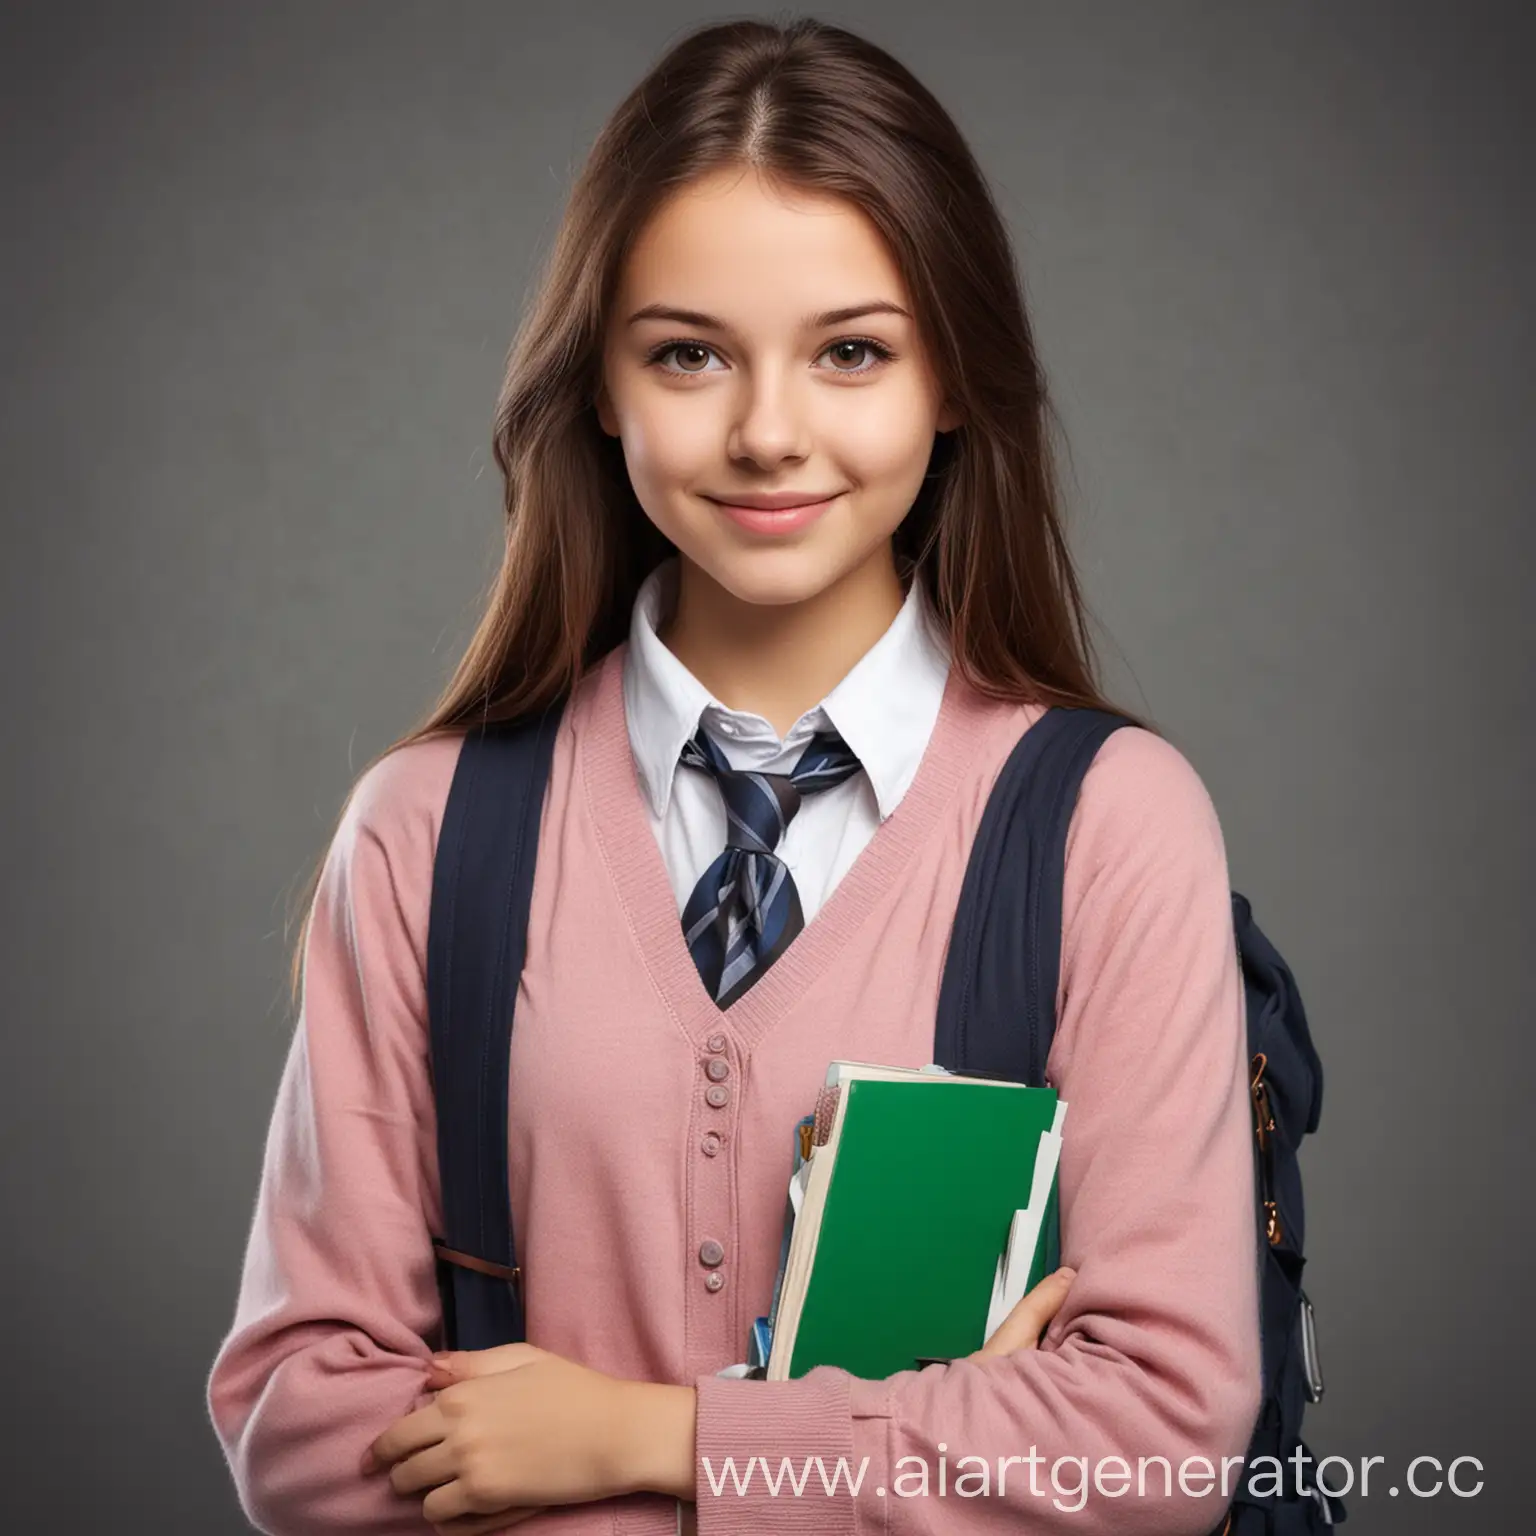 Bright-Young-Student-Girl-Studying-with-Books